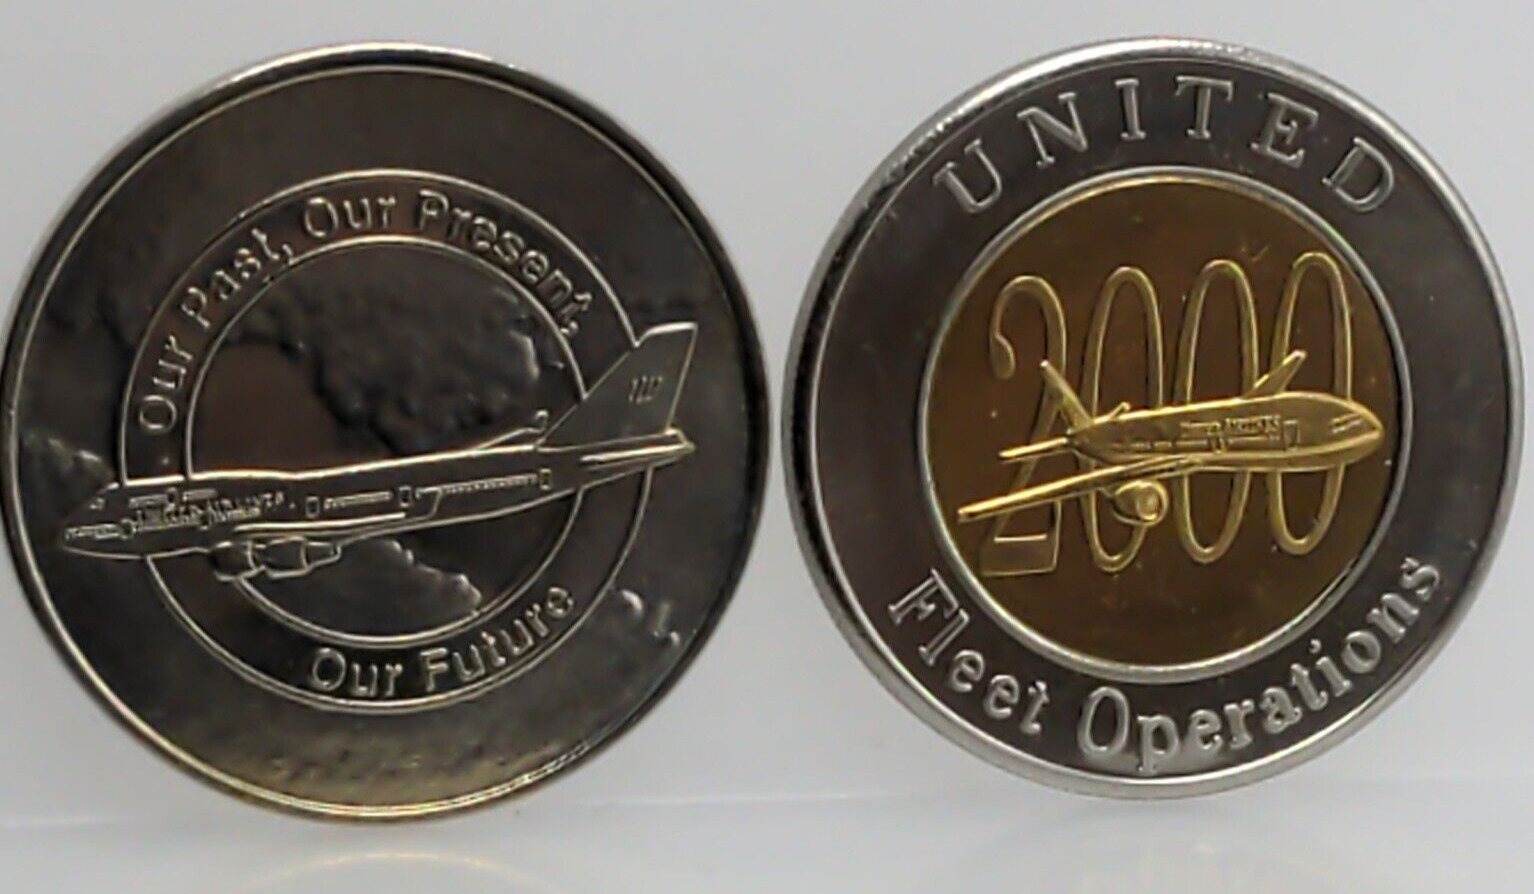 UNITED AIRLINES FLEET OPERATIONS Lot of 2 Coins / Tokens 747 777